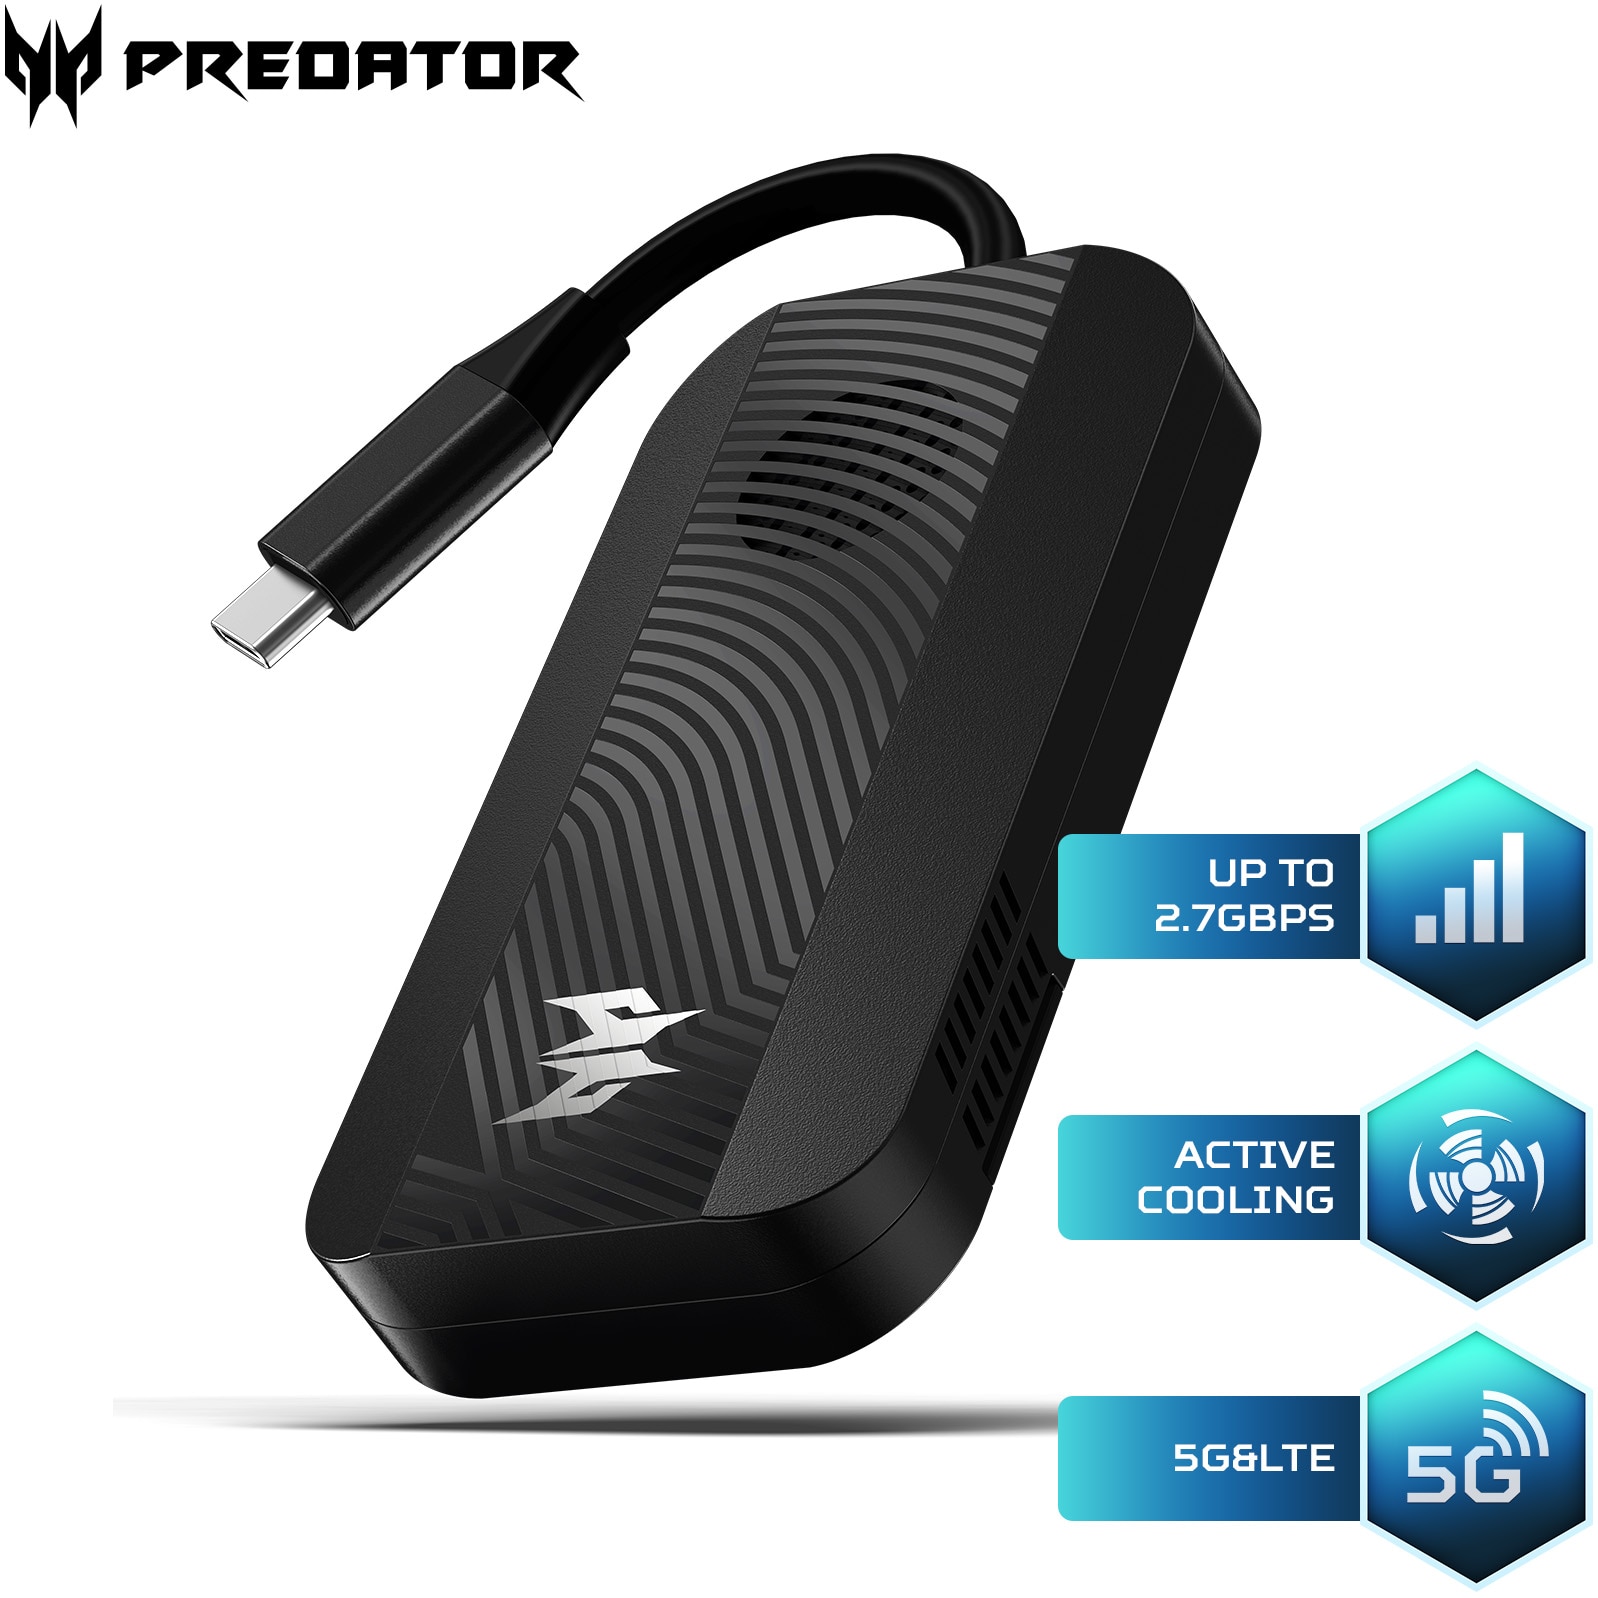 Fotografie Modem Acer Predator Connect D5 5G, SIM card slot, 2.7Gbps SA, 2.5Gbps NSA, Active Fan Cooling, USB 3.1 Type-C